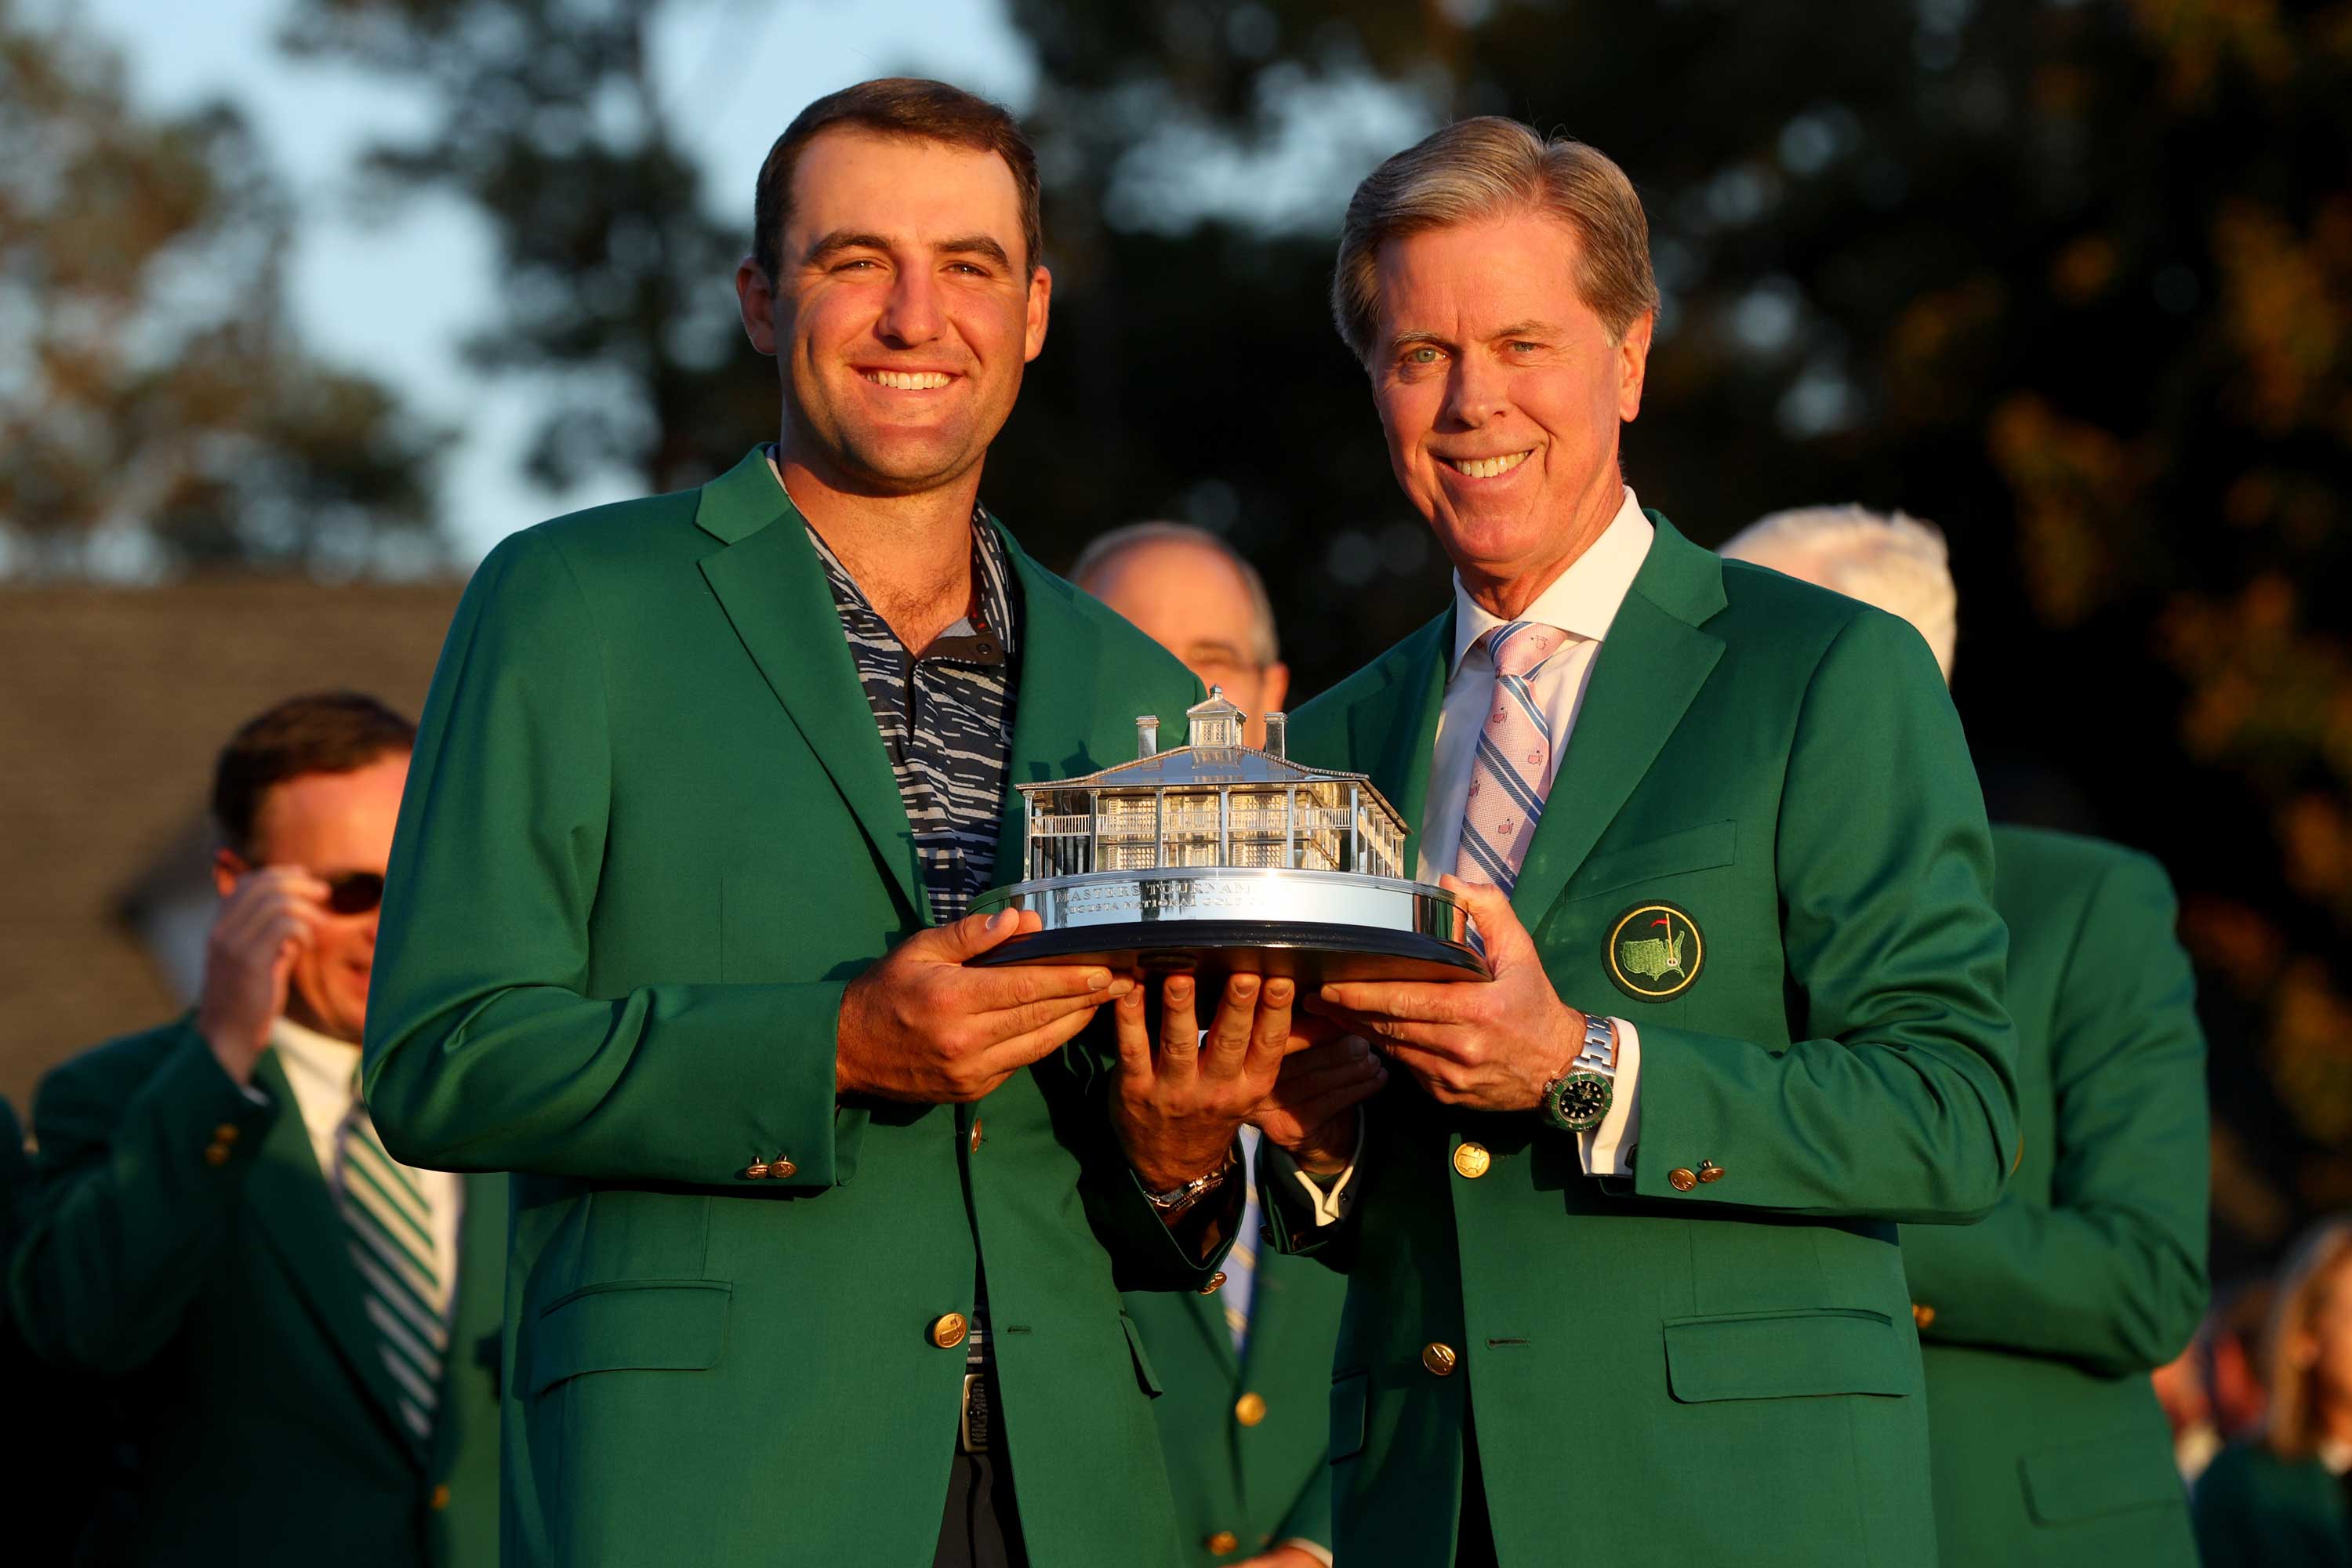 Masters Tournament Will Let LIV Golf Players Compete in 2023 - The